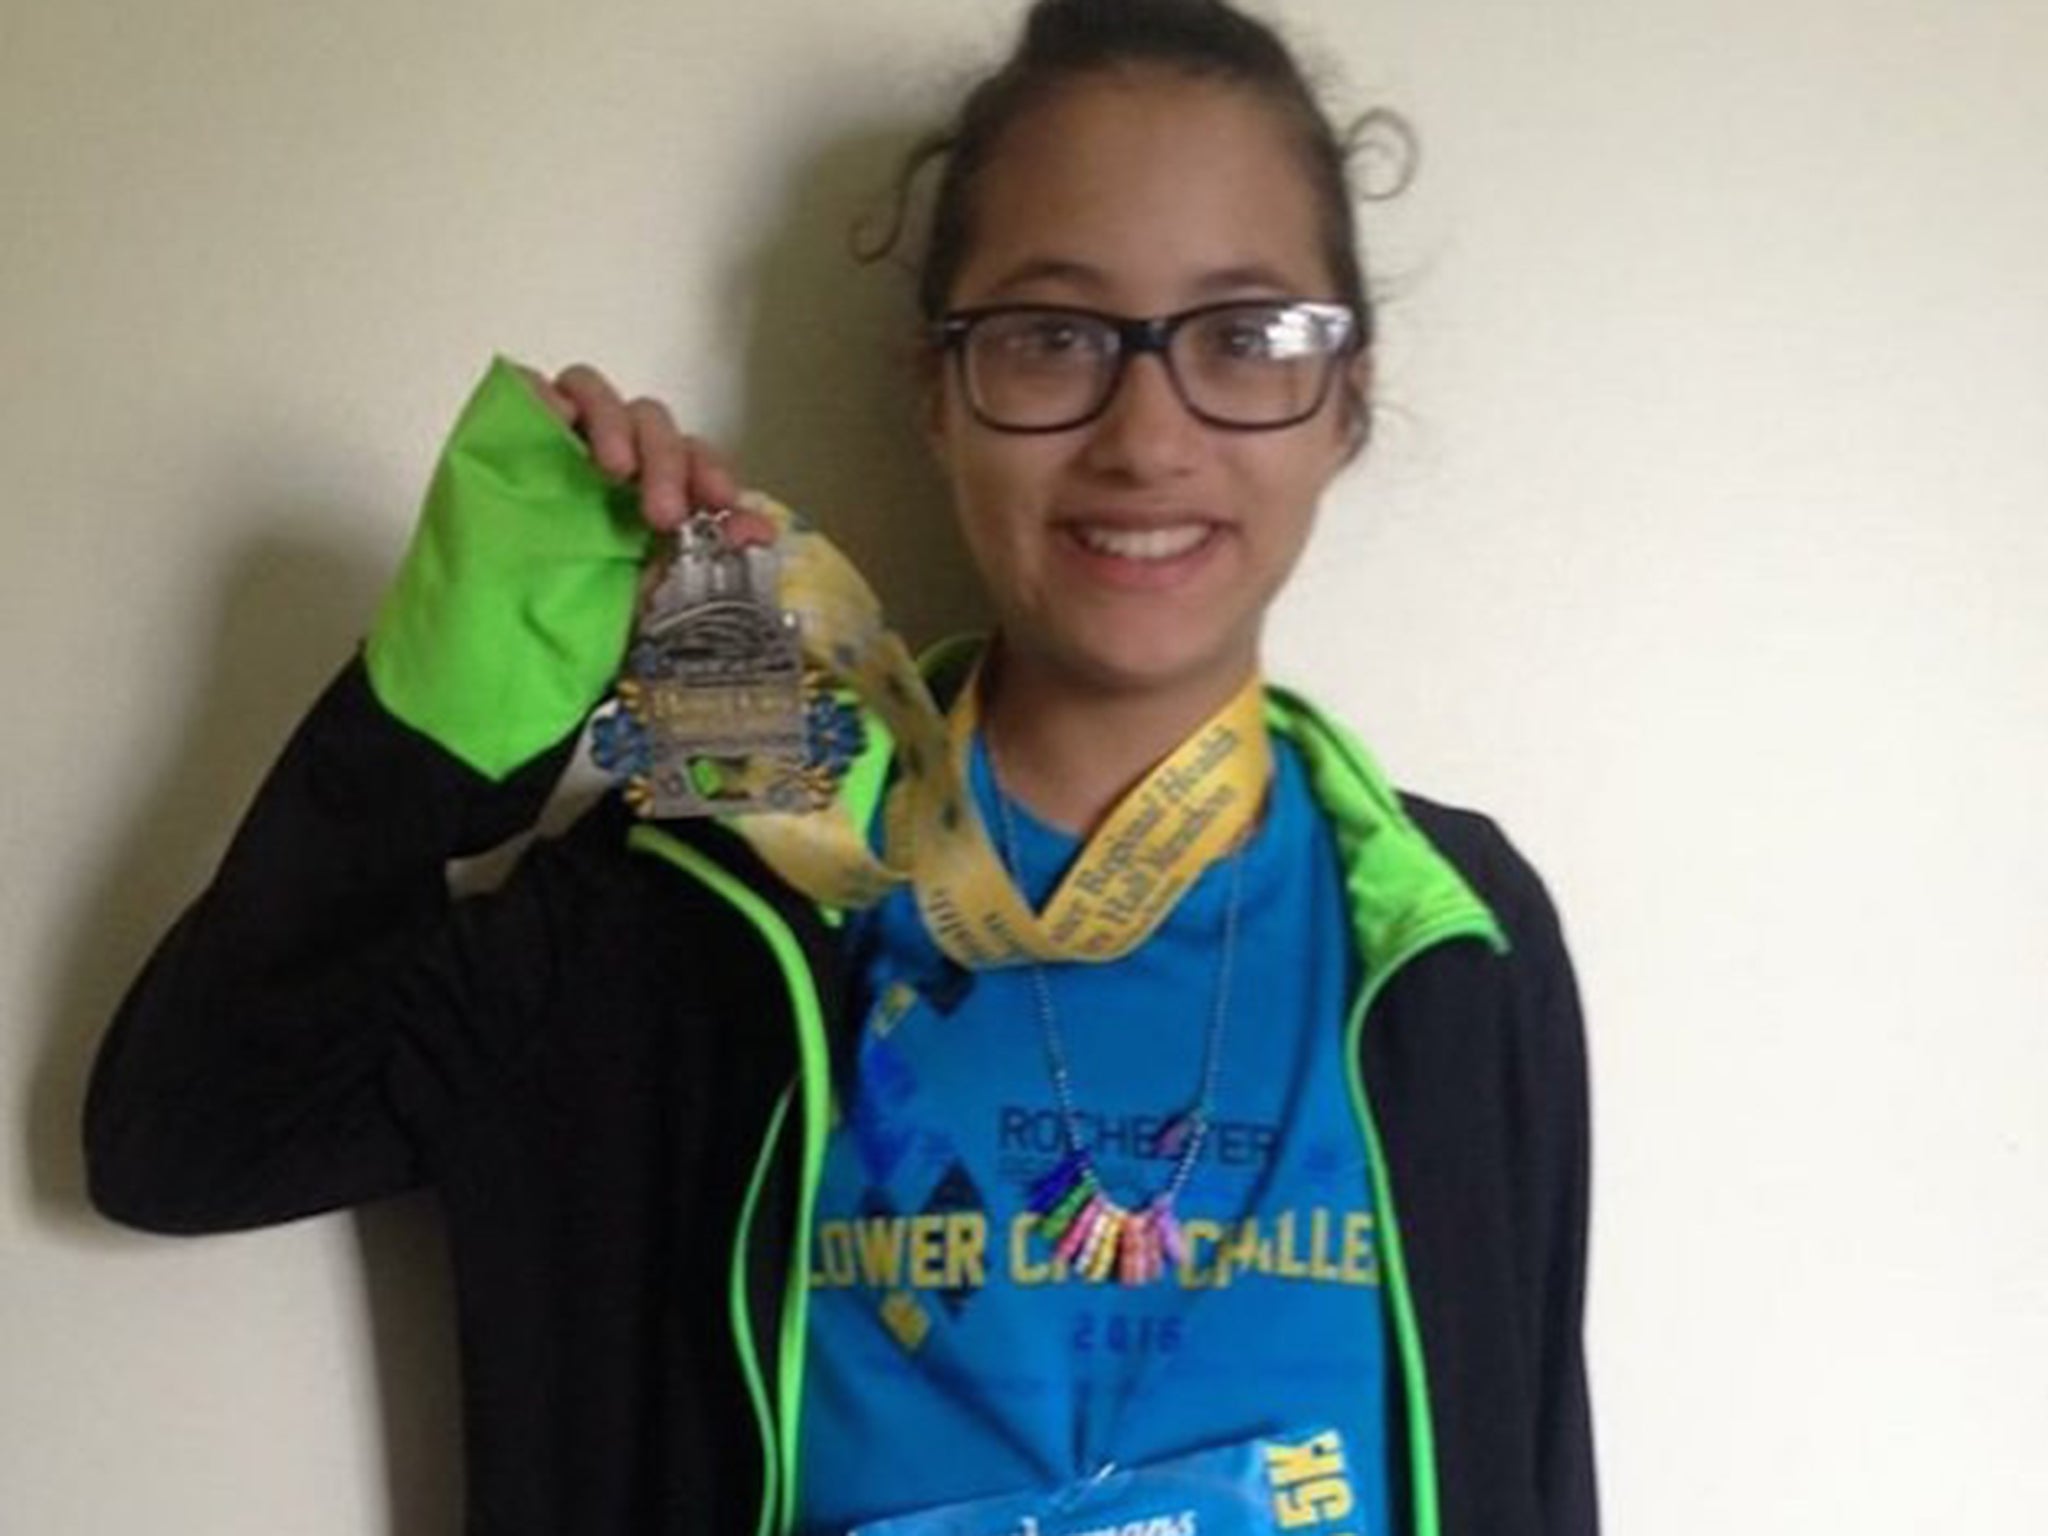 LeeAdiancez Rodriguez spent two months training for the 5K race she had entered